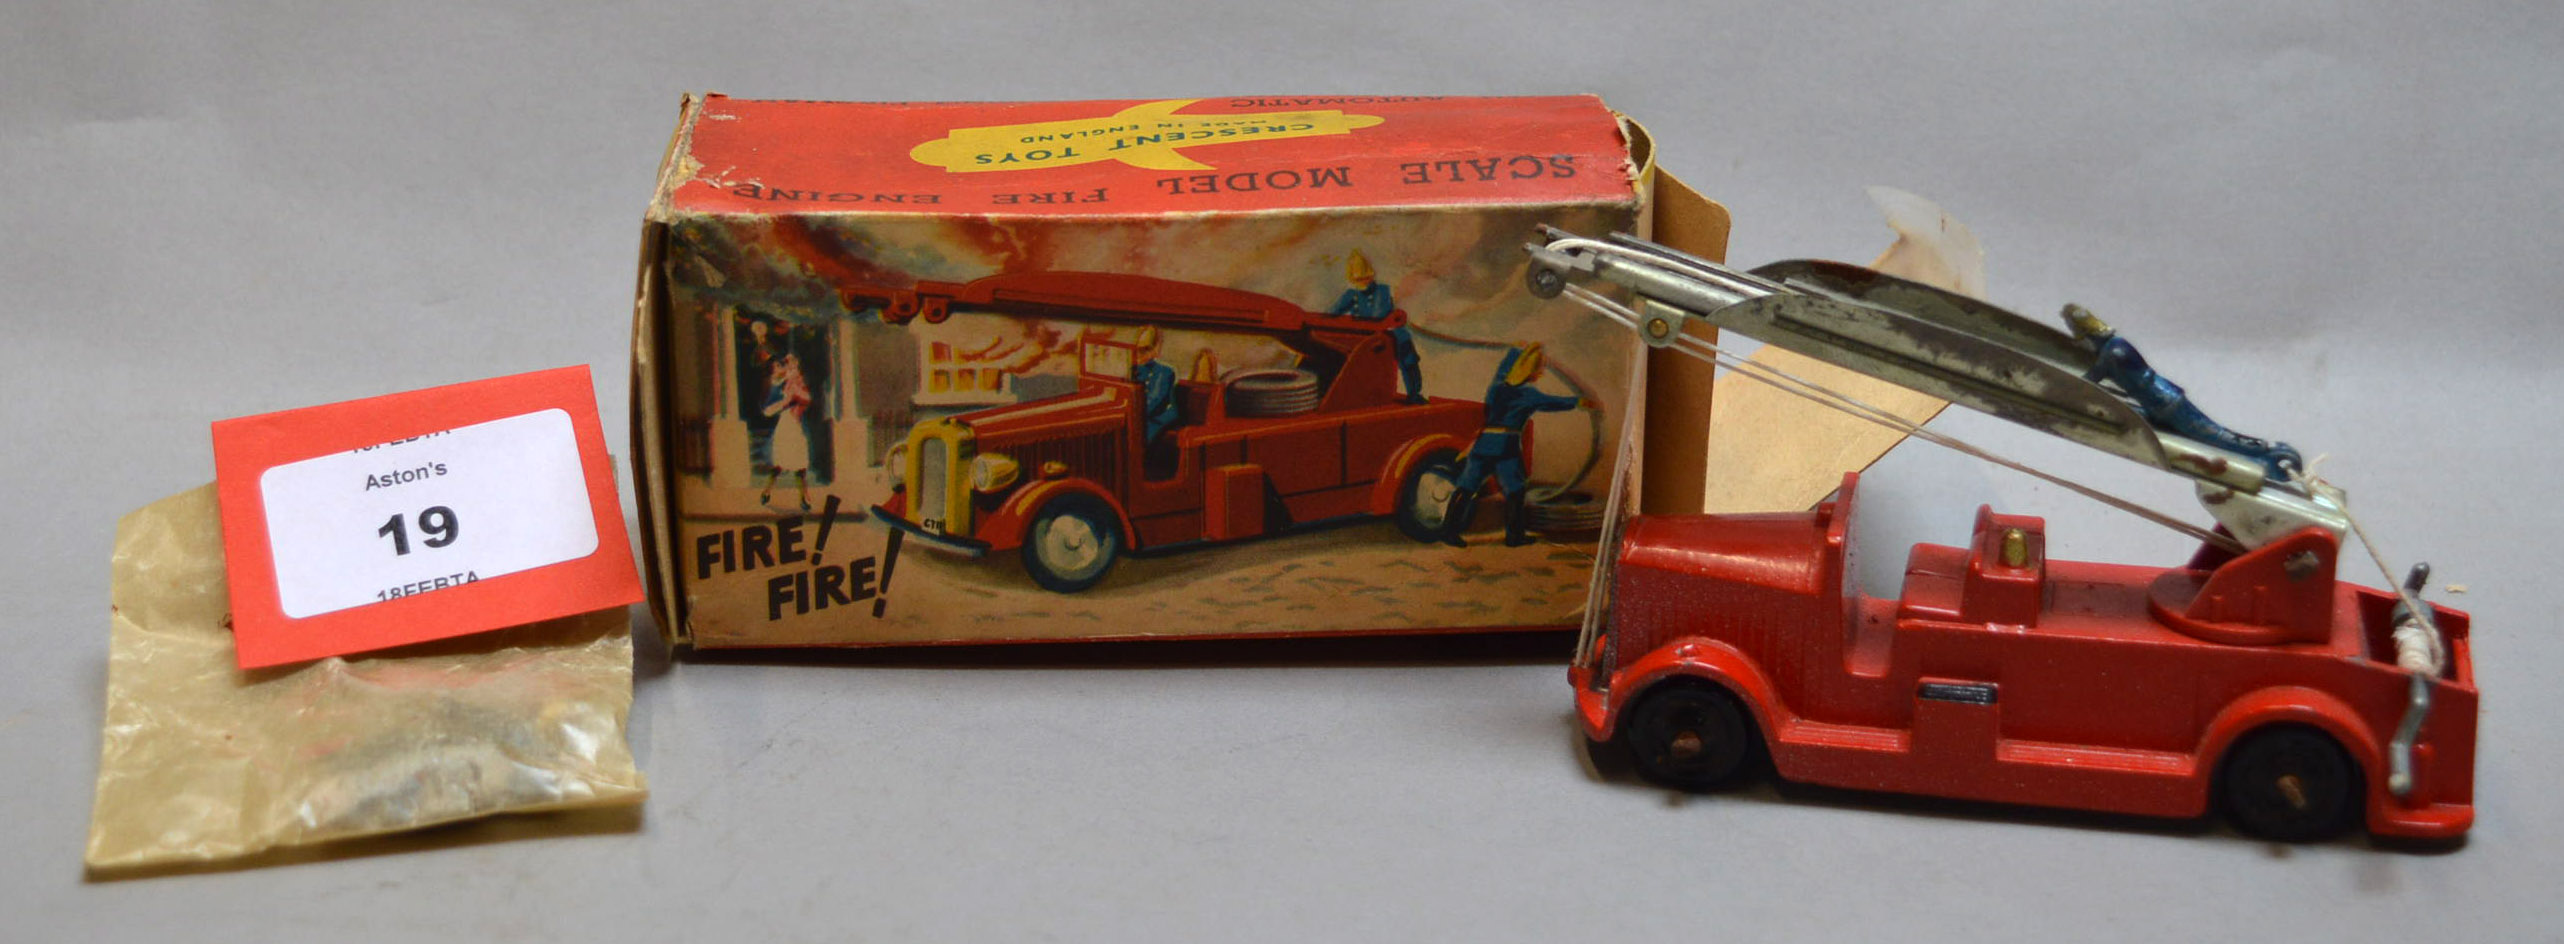 A boxed Crescent Toys diecast model #1221 Fire Engine with Extending Ladder and Climbing Fireman